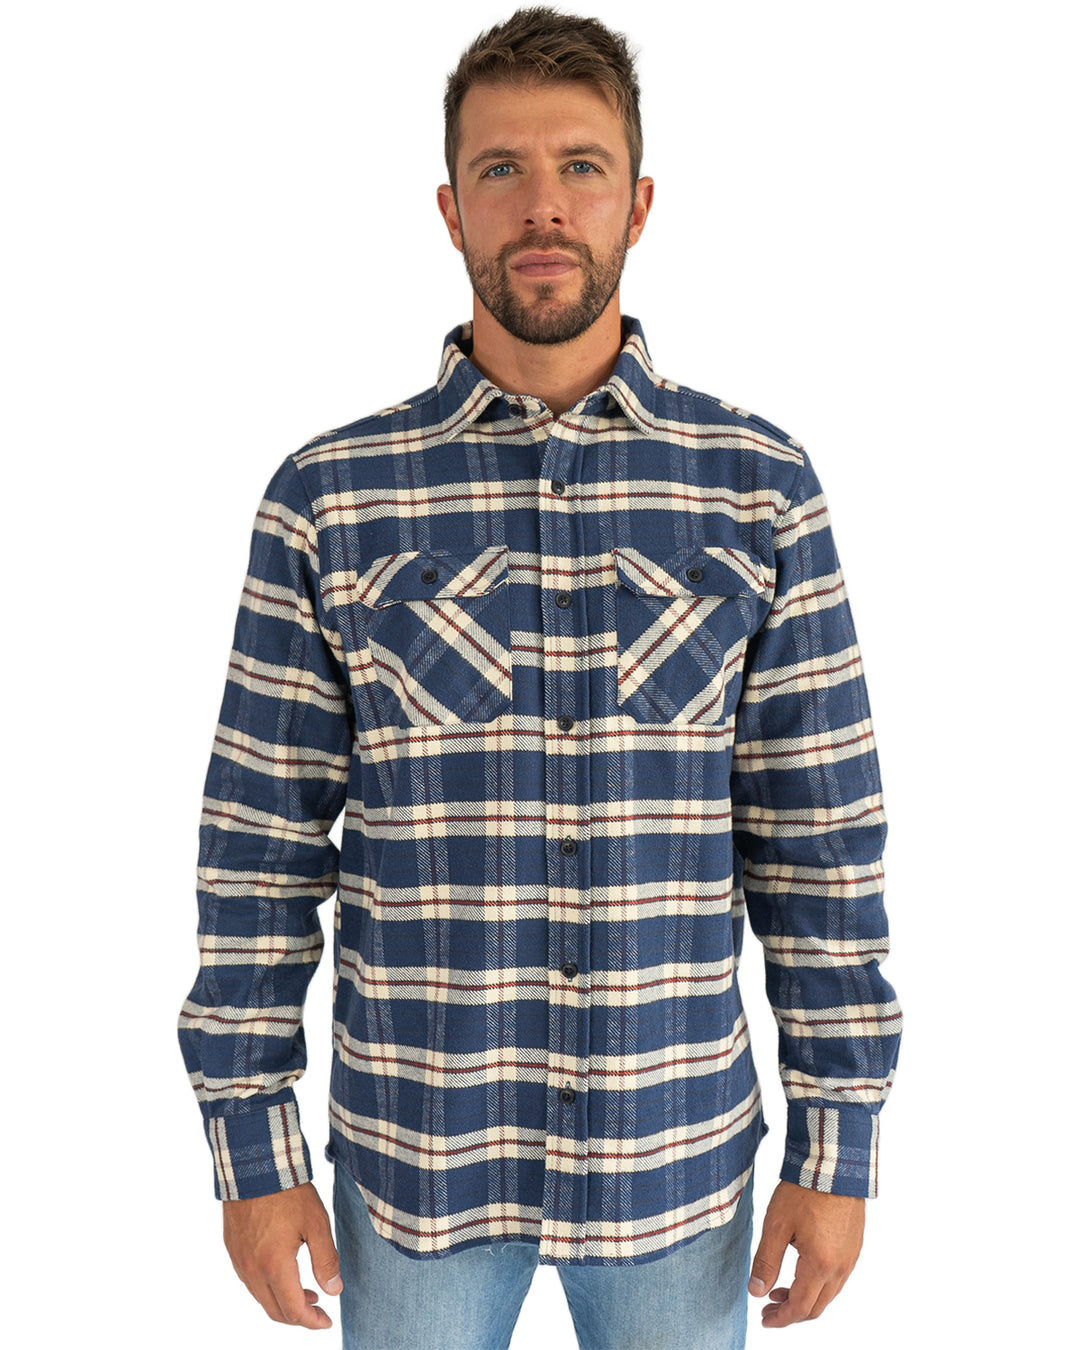 Grand Flannel in Navy Plaid, 100% Cotton Flannel Shirt for Men by MuskOx